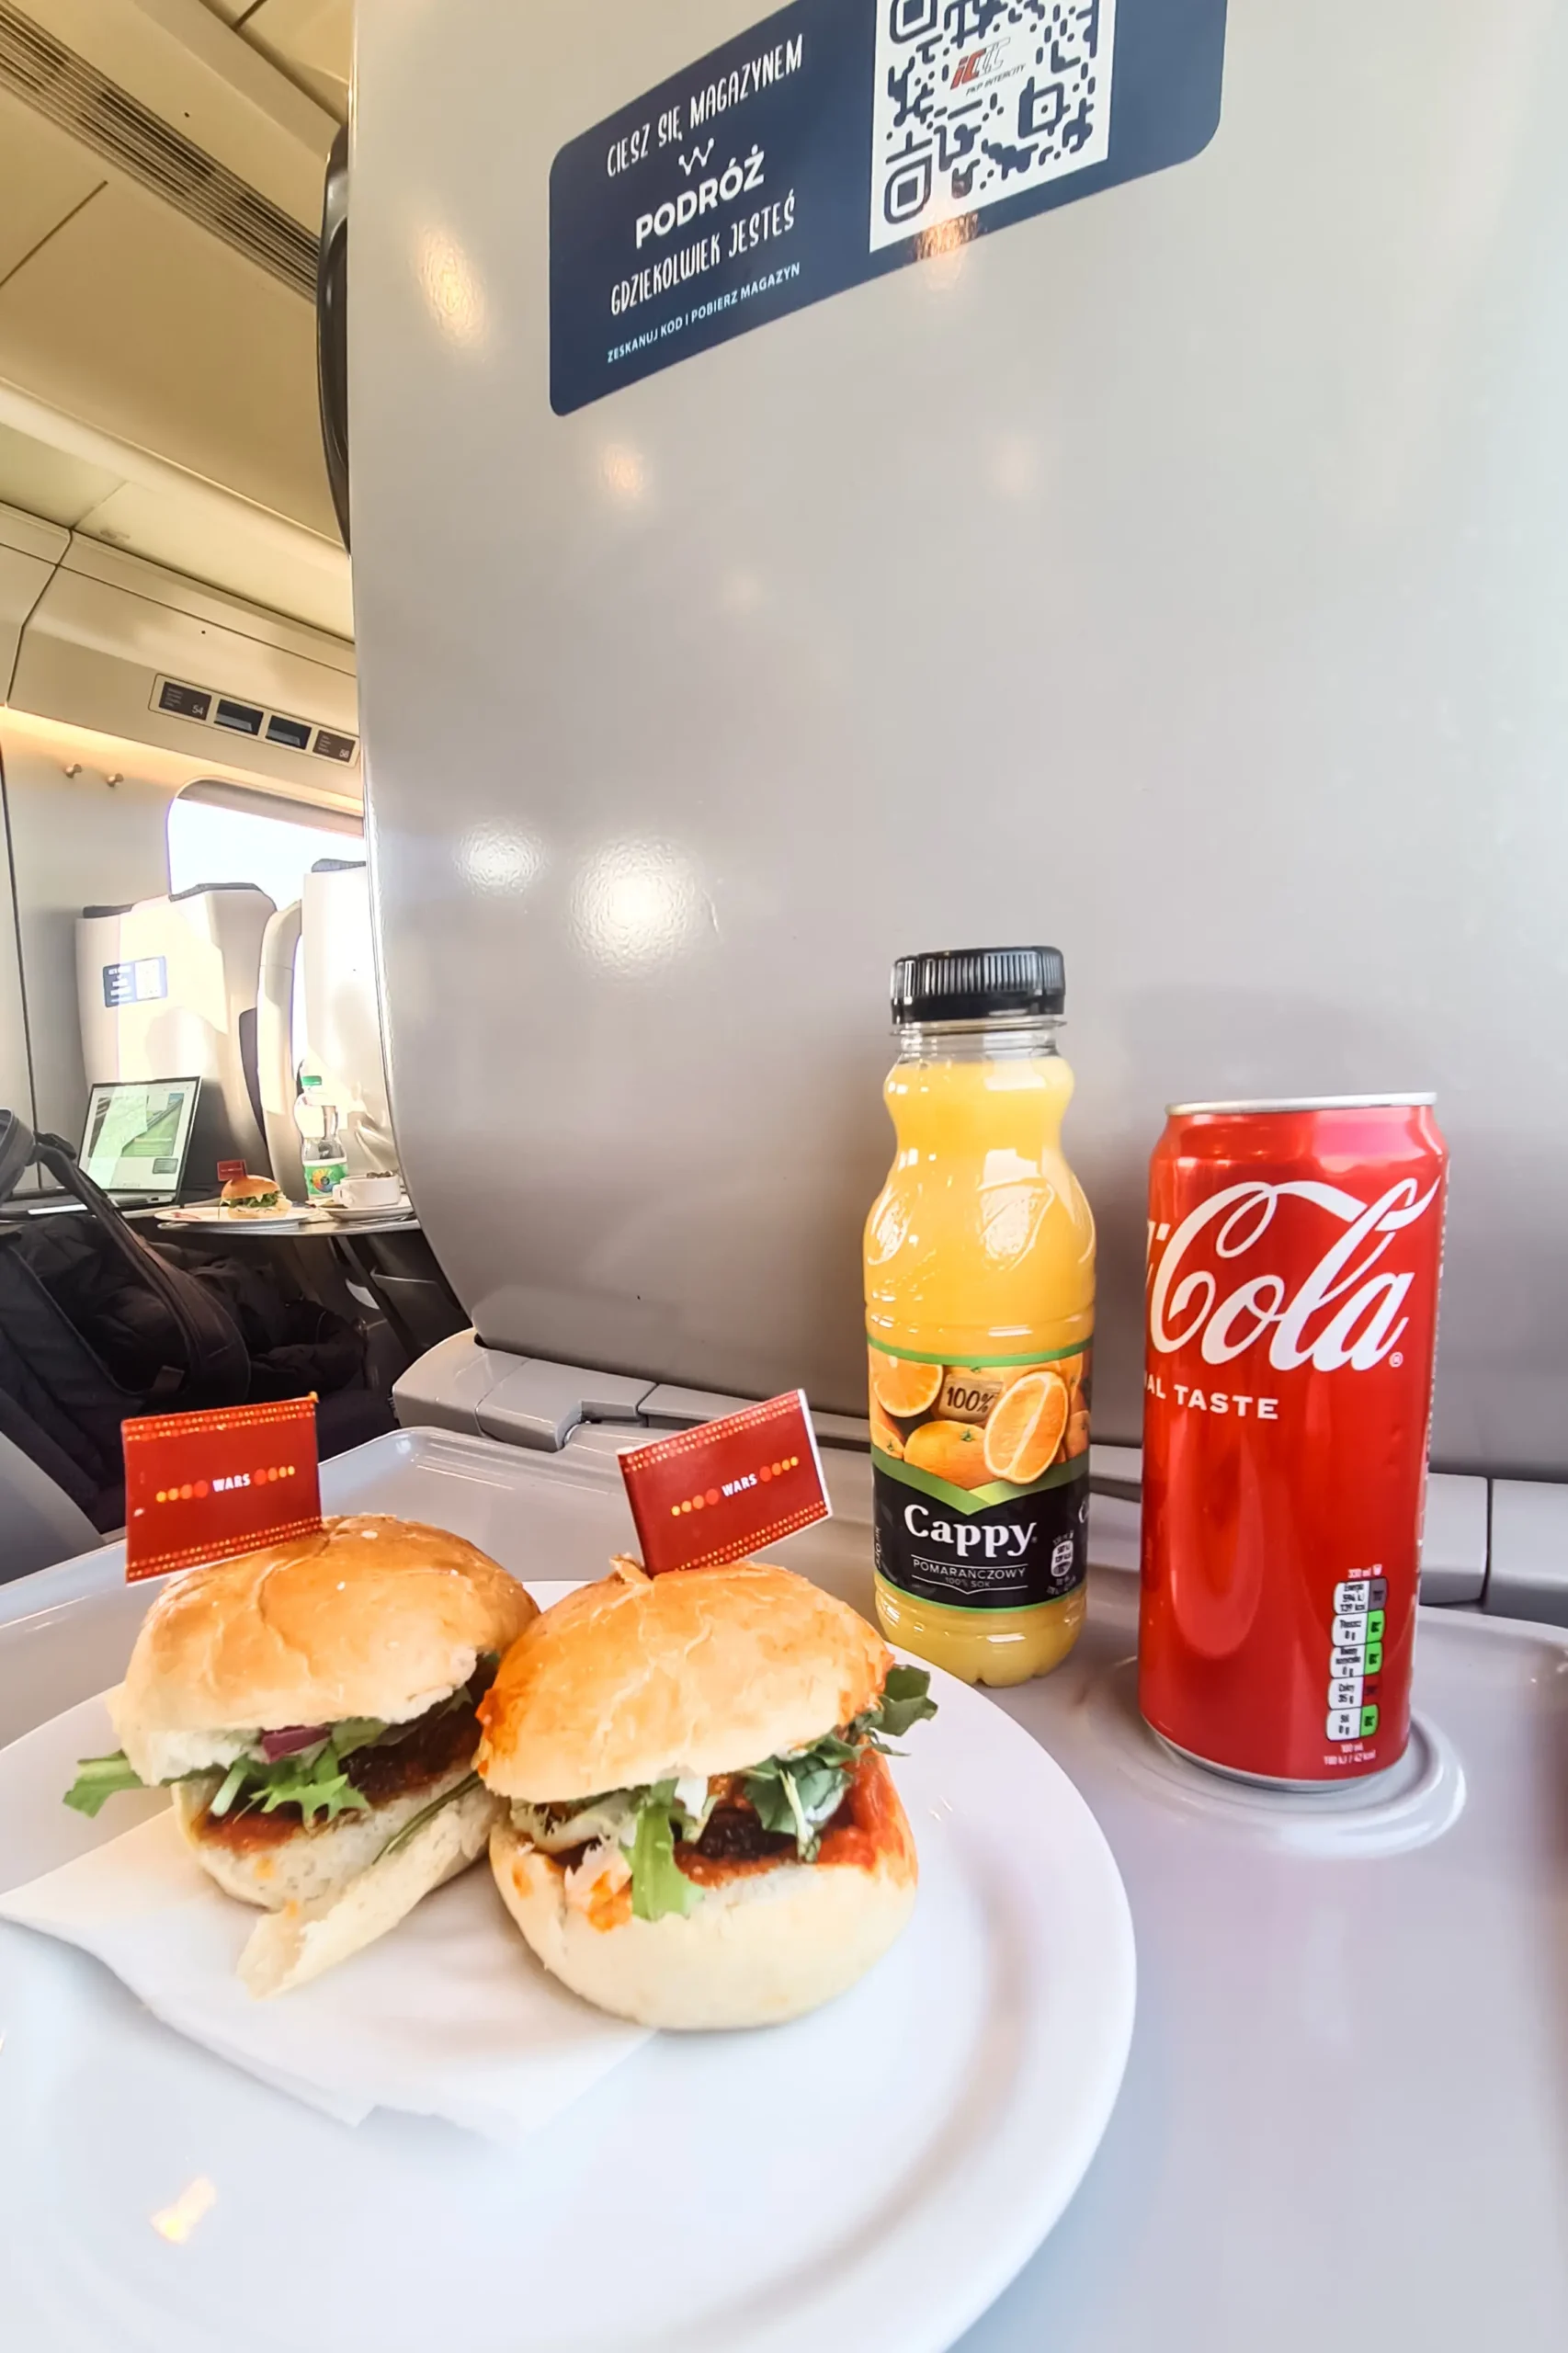 Two sandwiches, red coke can and an orange juice on a tray table during a train ride in Poland.